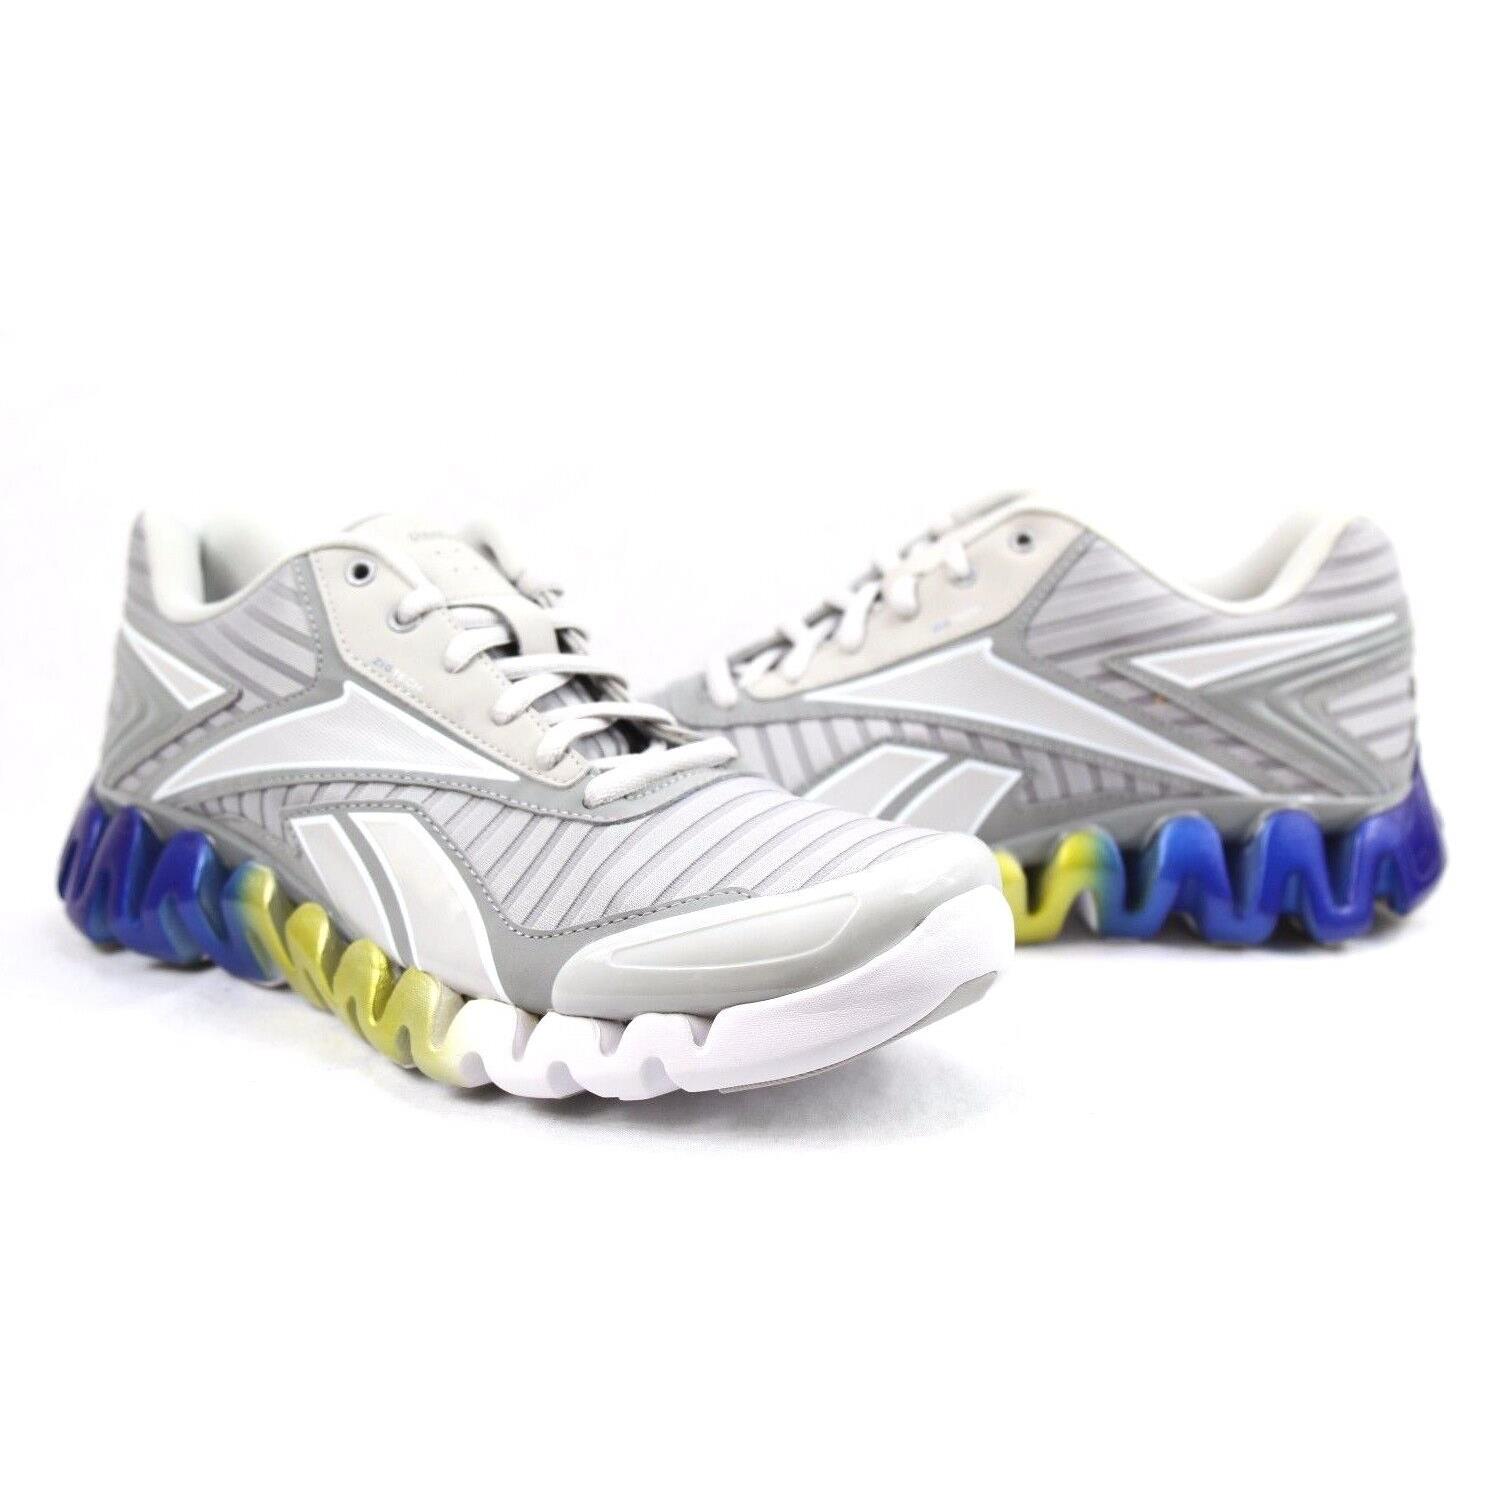 Reebok Men`s Shoe Zigactivate Running Shoes Men`s Size 9 Only Available J84738